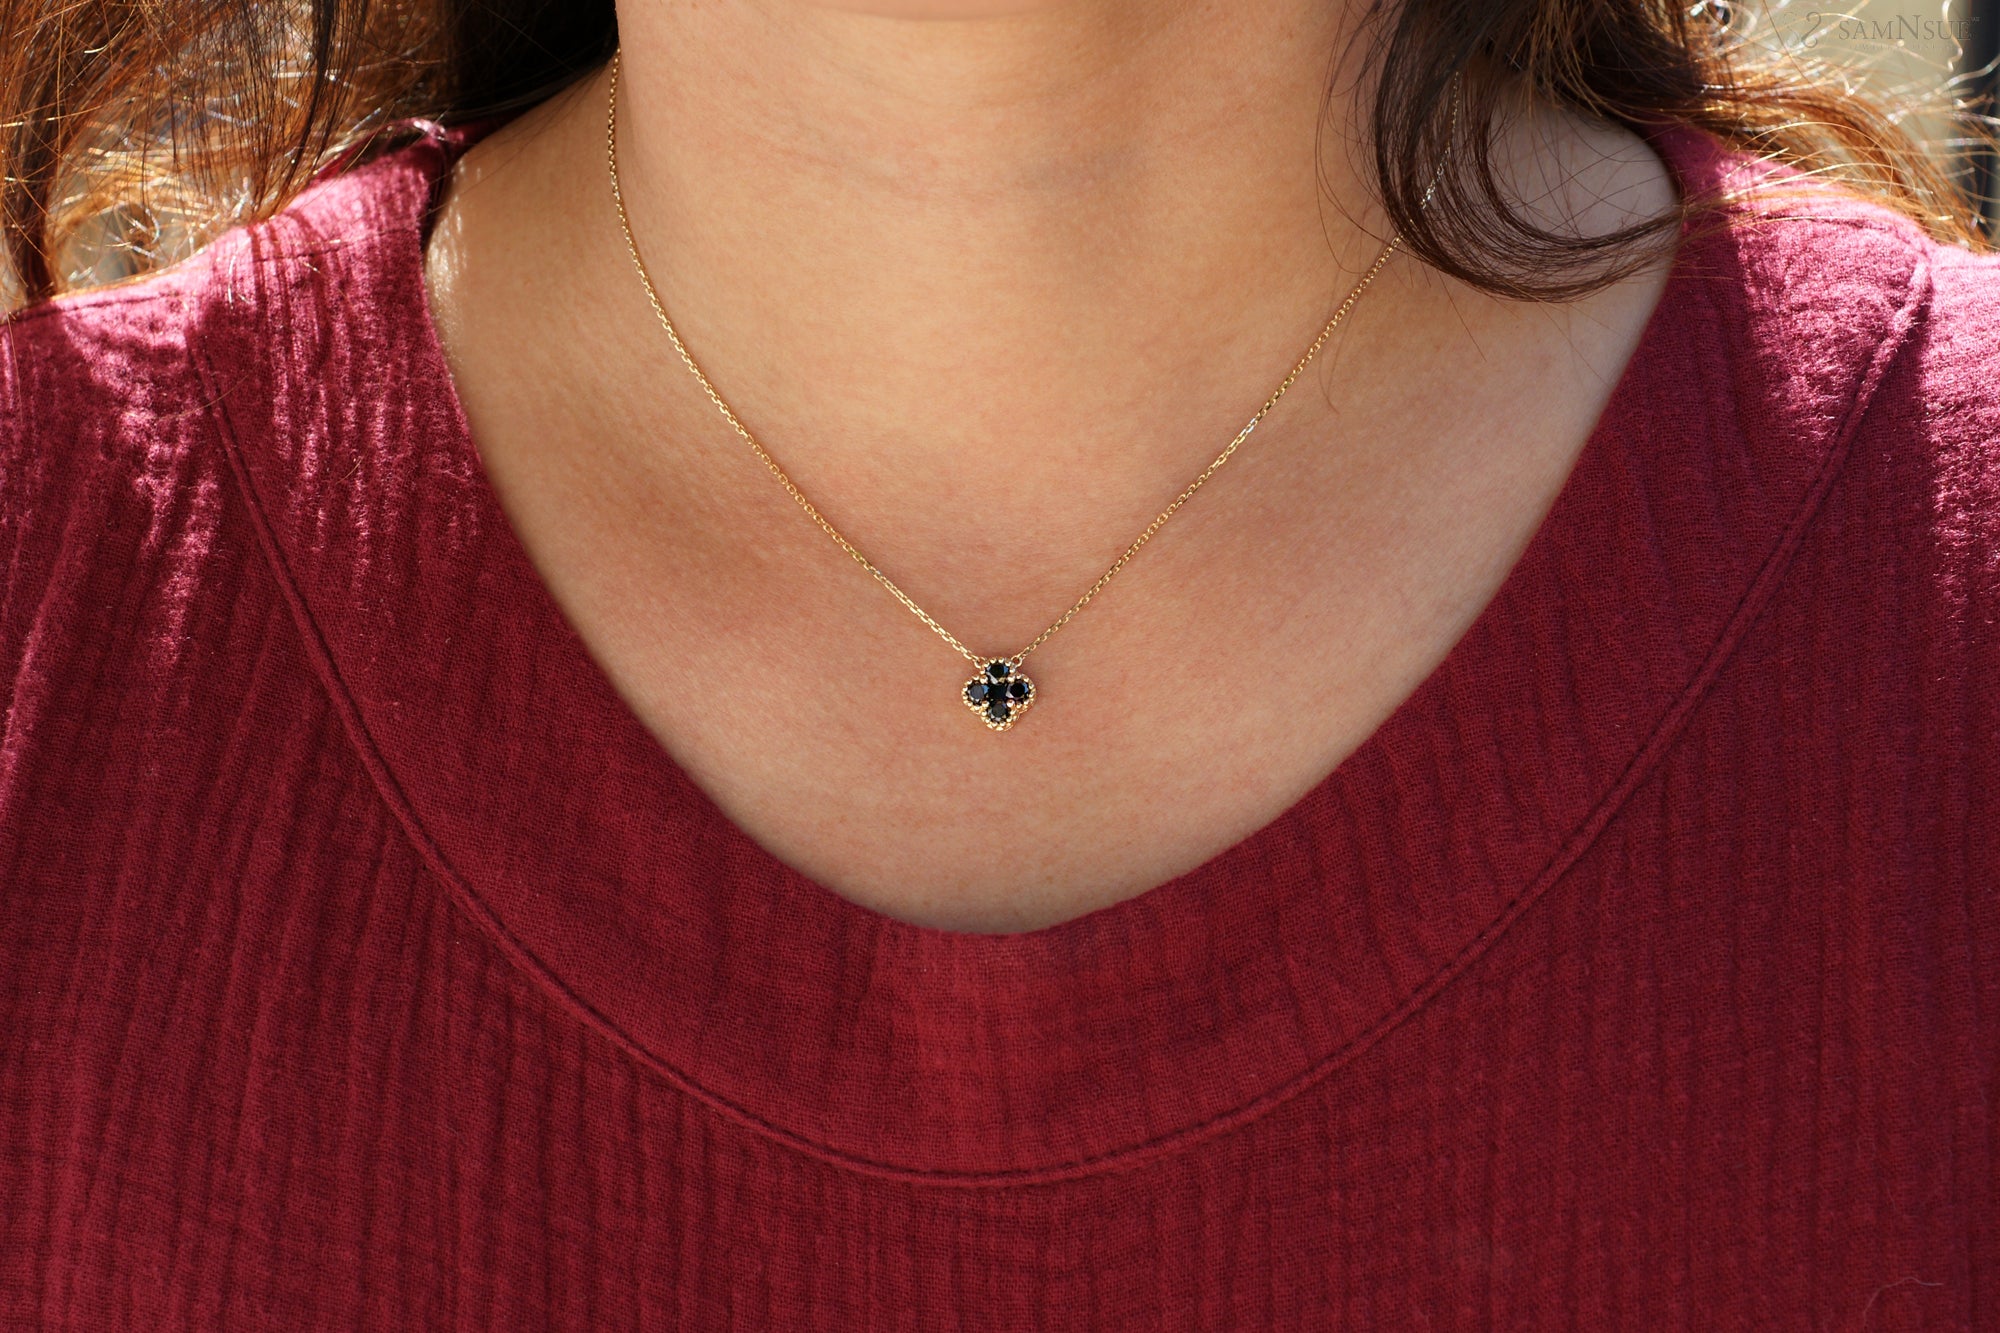 Clover black diamond necklace in yellow gold